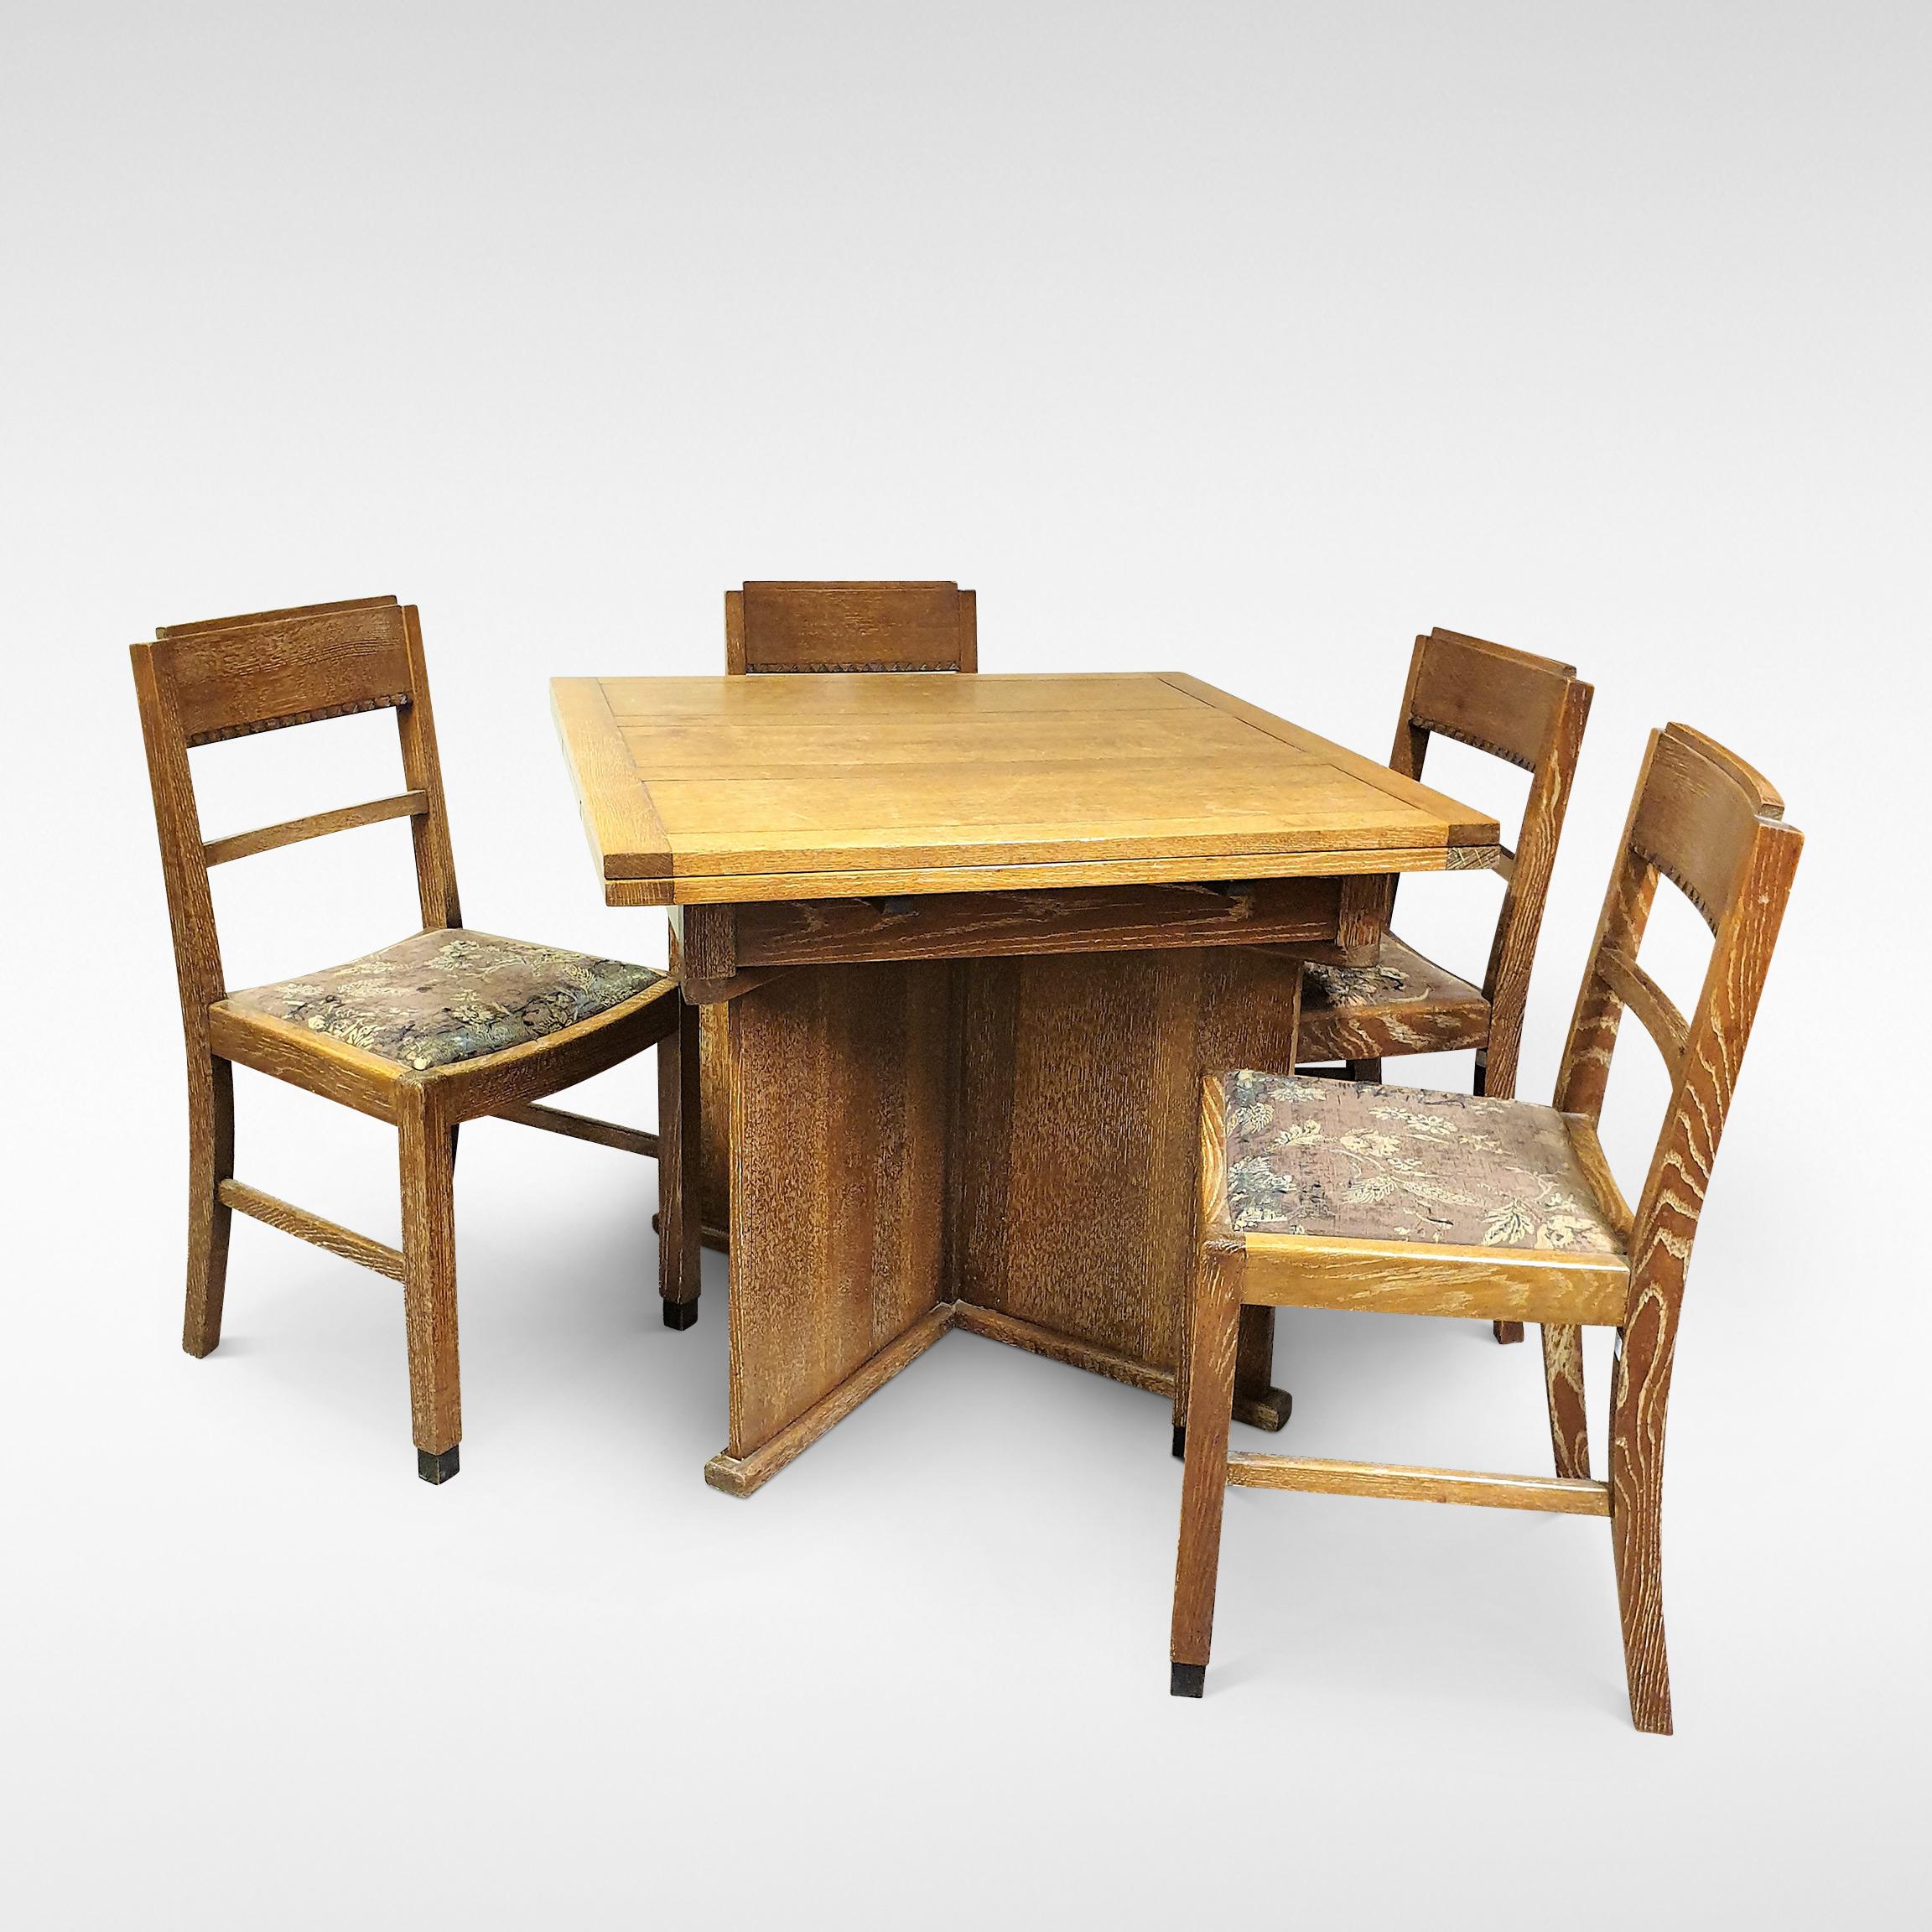 A stylish and compact extending dining table with pull out leaves and four matching chairs comprise this Art Deco Dining Suite in Limed Oak by Bowman Bros, circa 1935. Bowmans of Camden Town were noted for their trendy modernist inspired furniture.